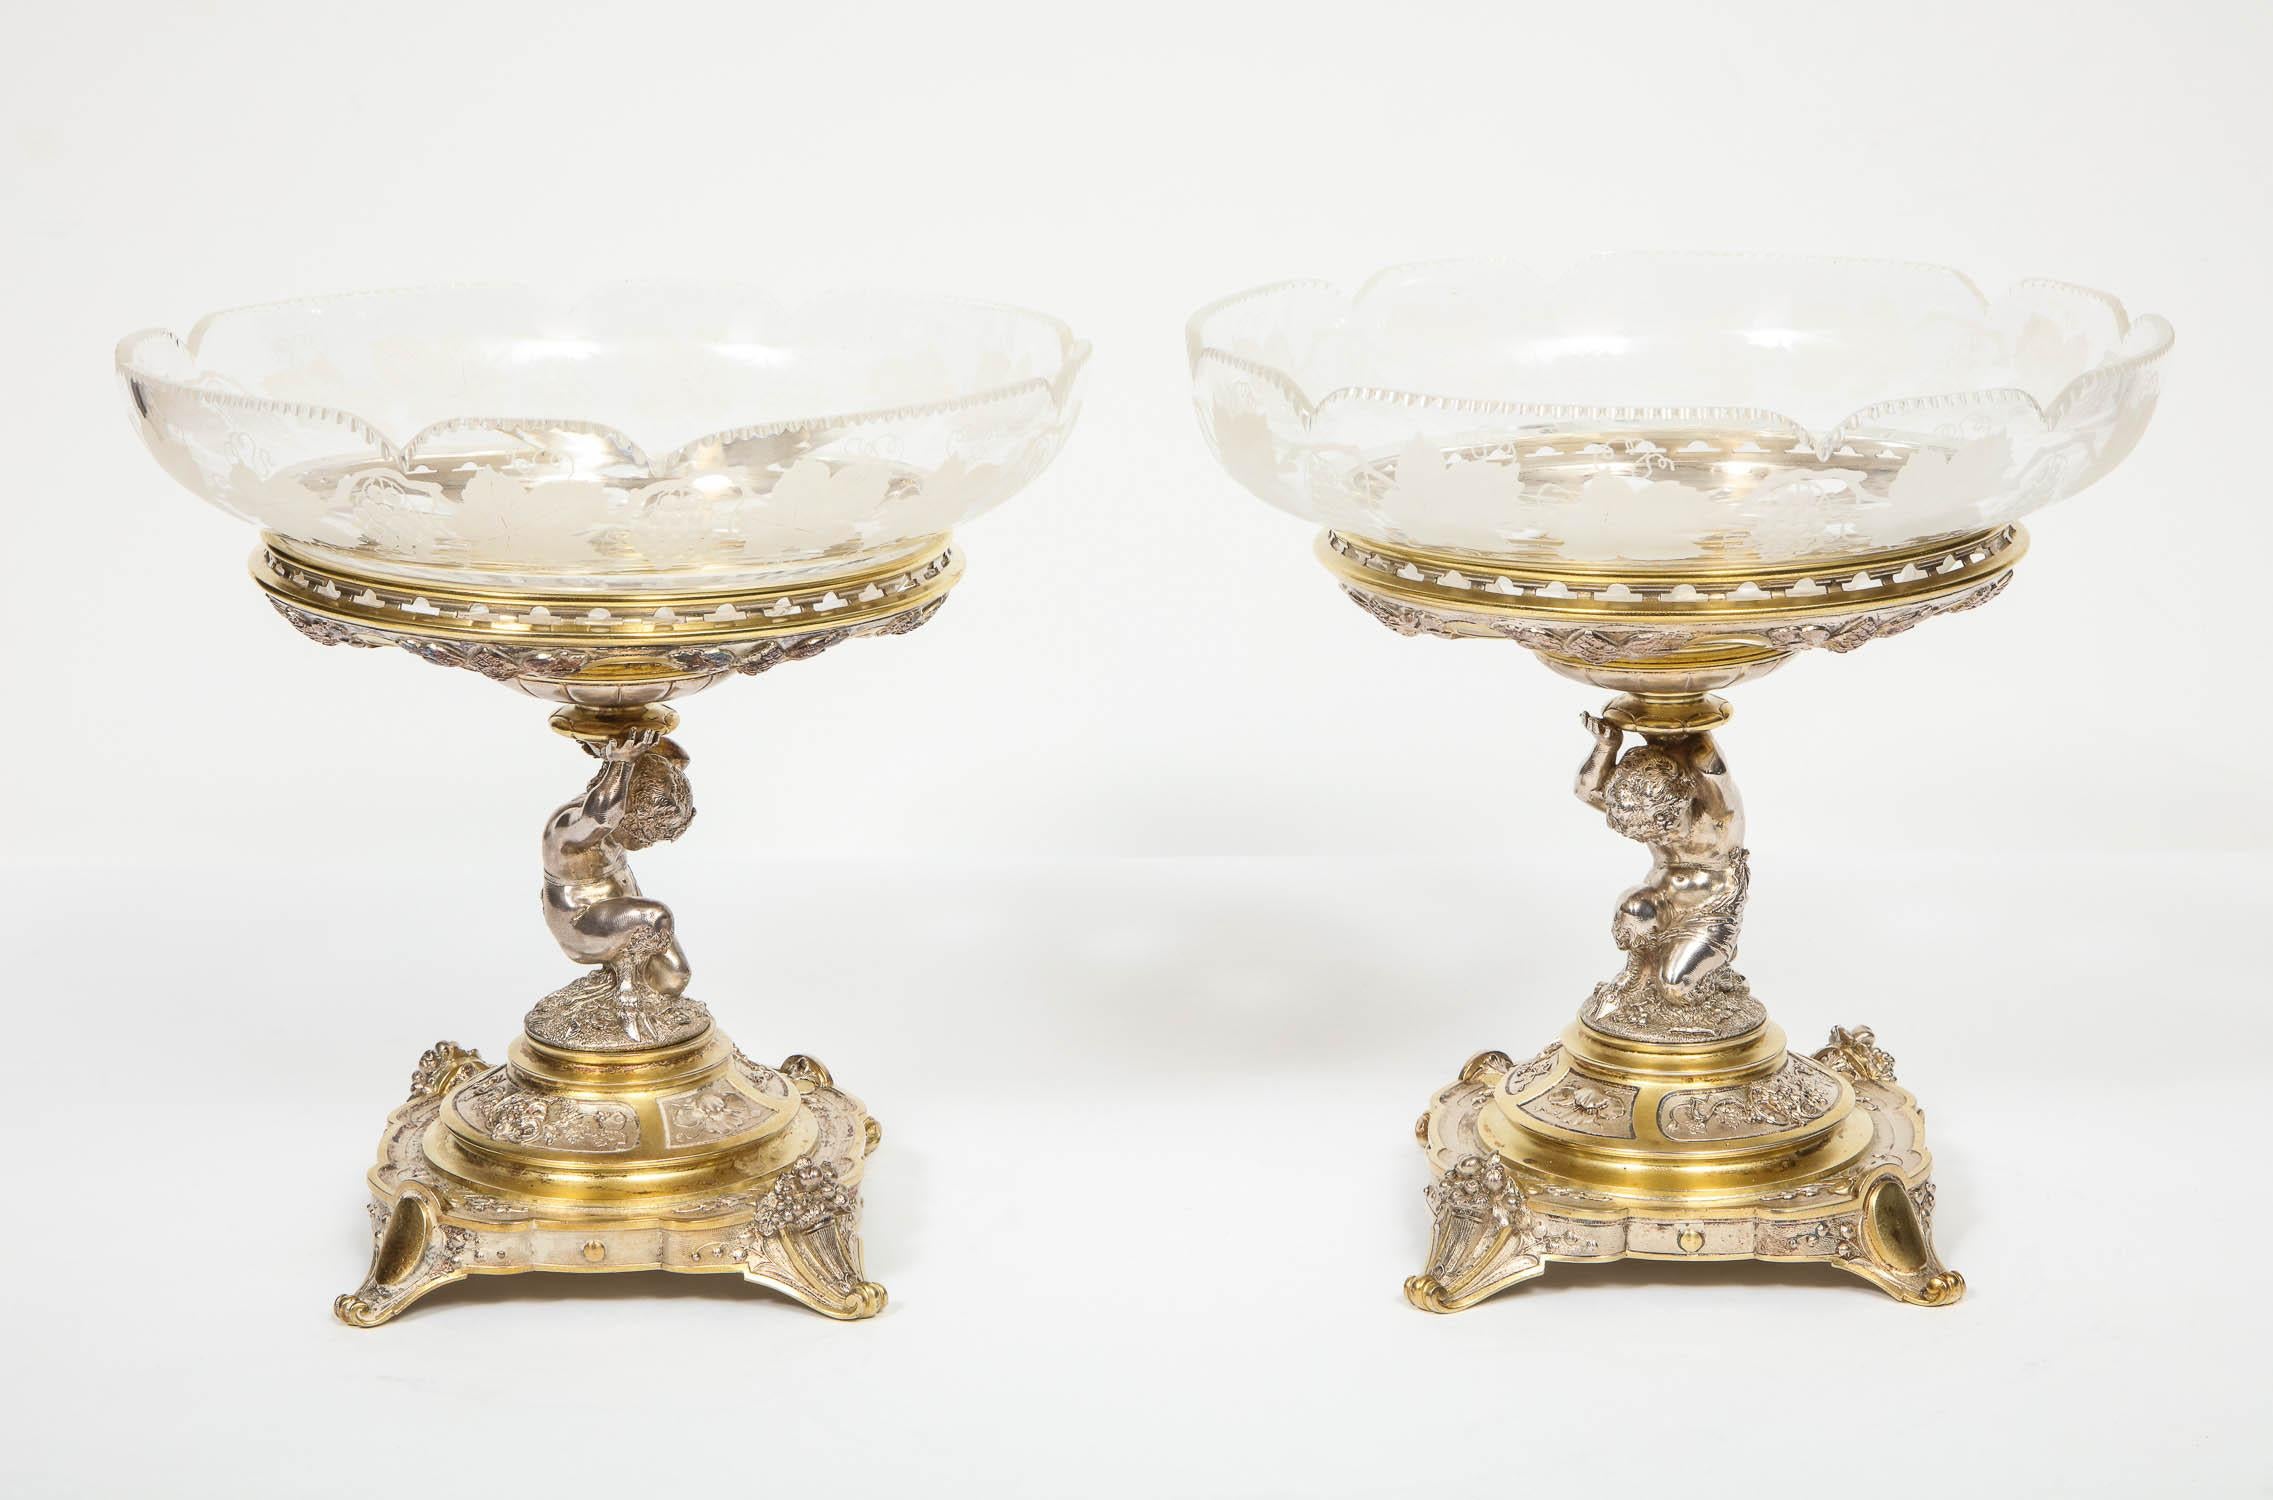 Elkington & Co., a pair of gilt and silvered bronze tazza centerpieces with original etched glass bowls.

Victorian period, Birmingham, England, circa 1867-1868.

The bowls finely etched with grapevine motif supported by figural stands in the